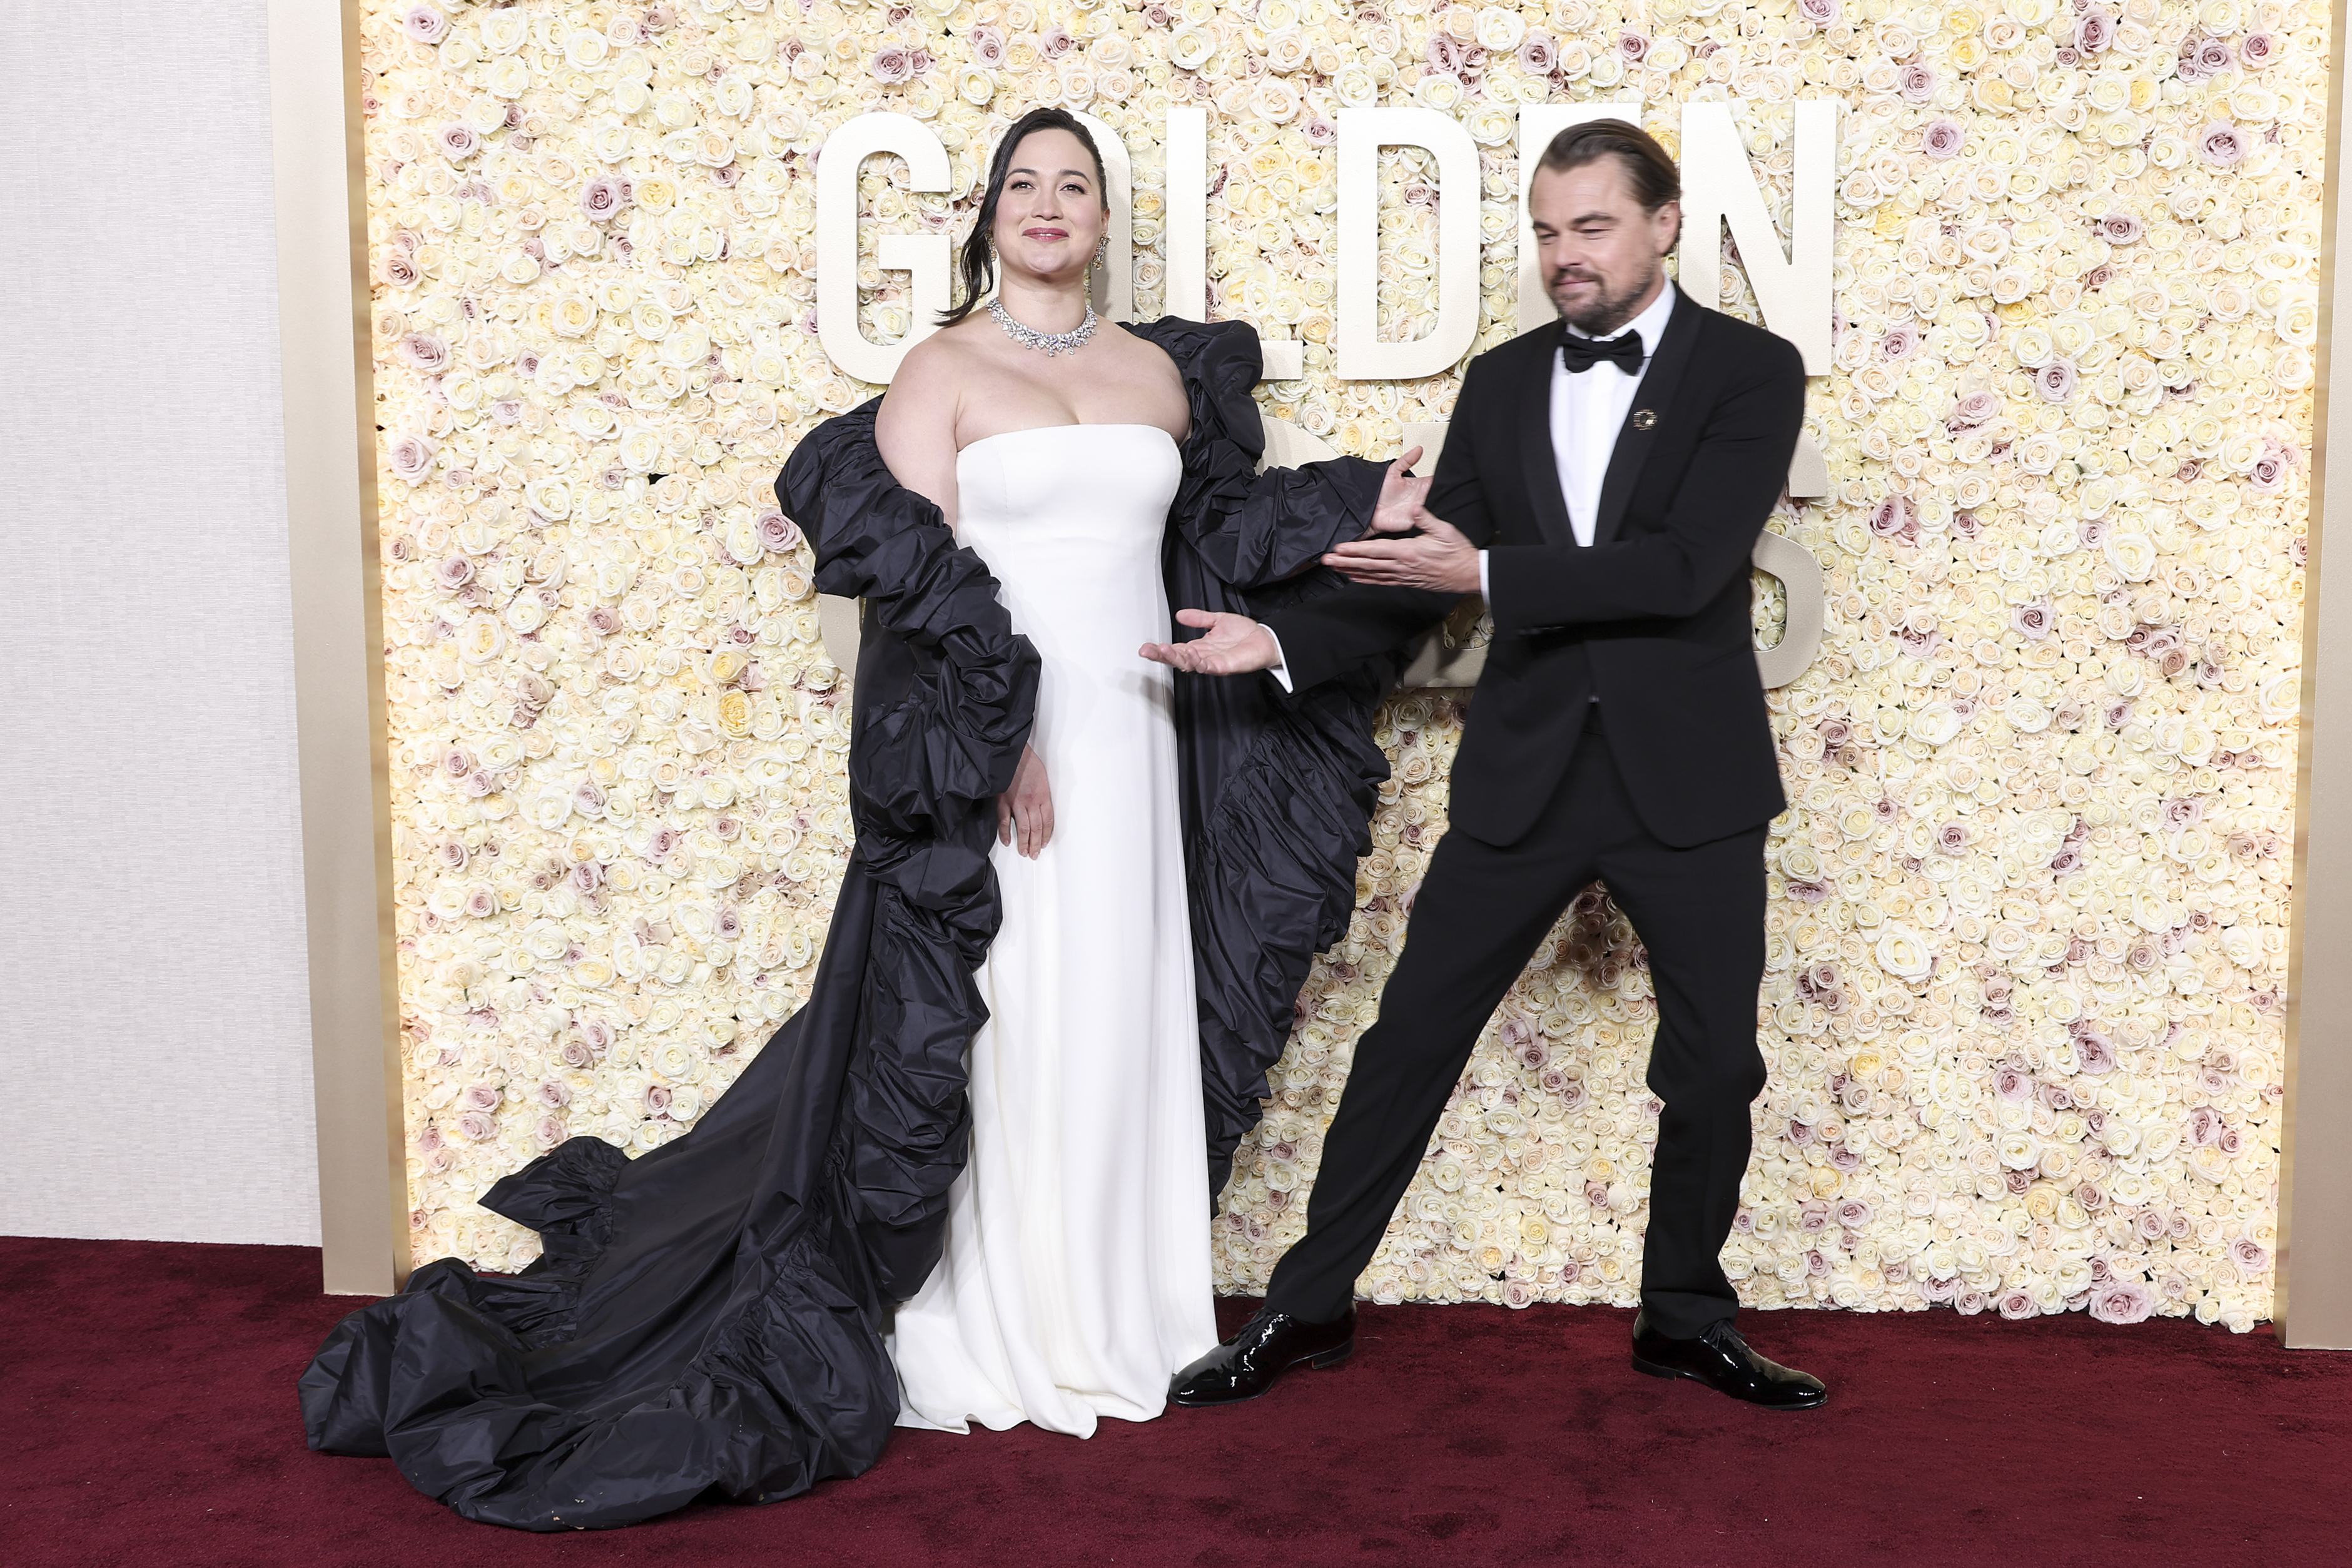 Lily with Leo, who is gesturing toward Lily, on the red carpet